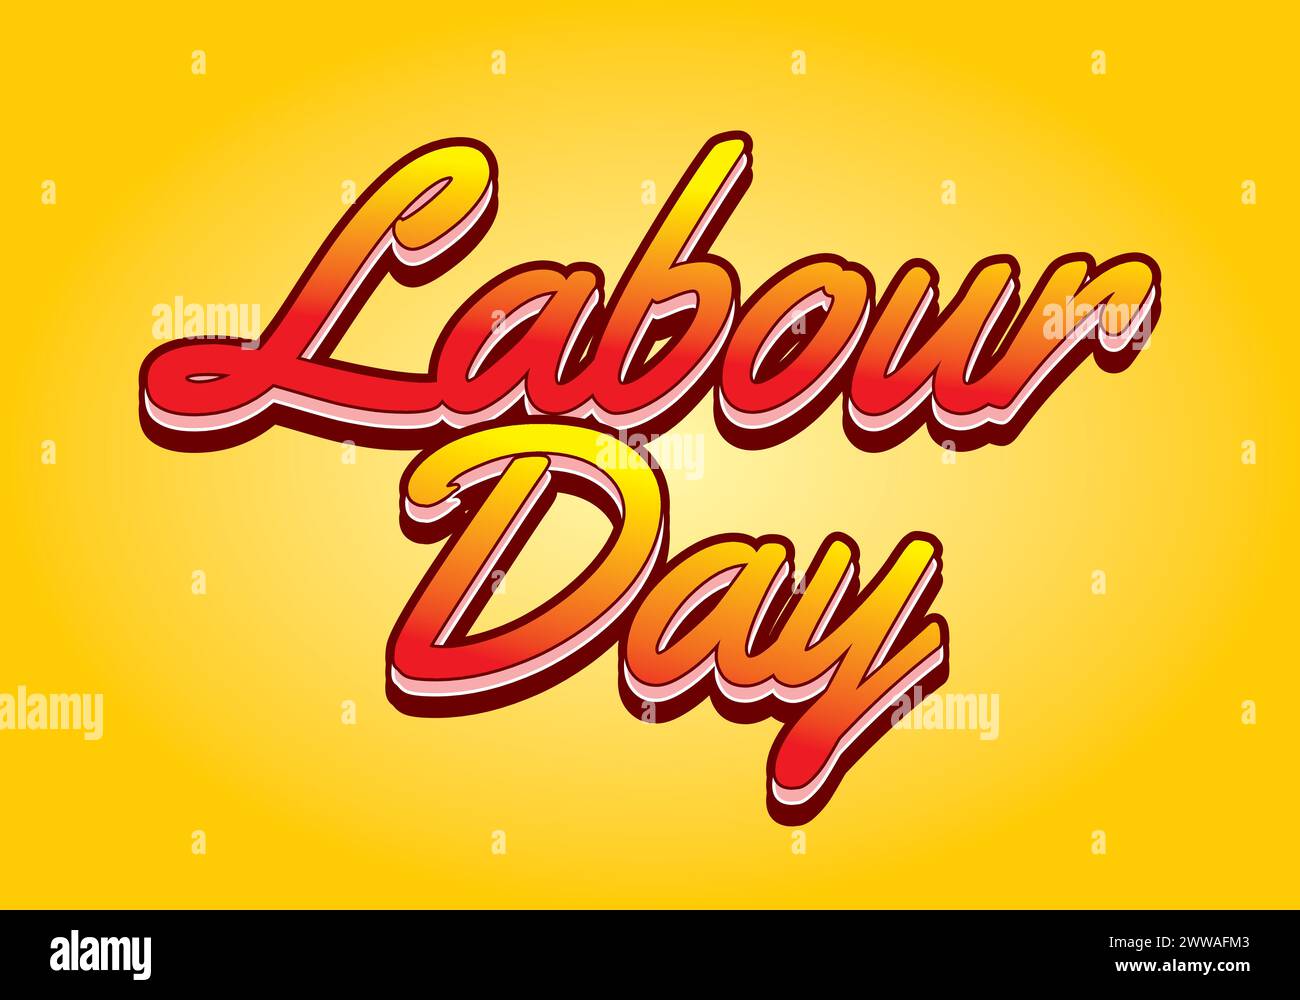 Labour day. Text effect design in yellow red color with eye catching effect Stock Vector